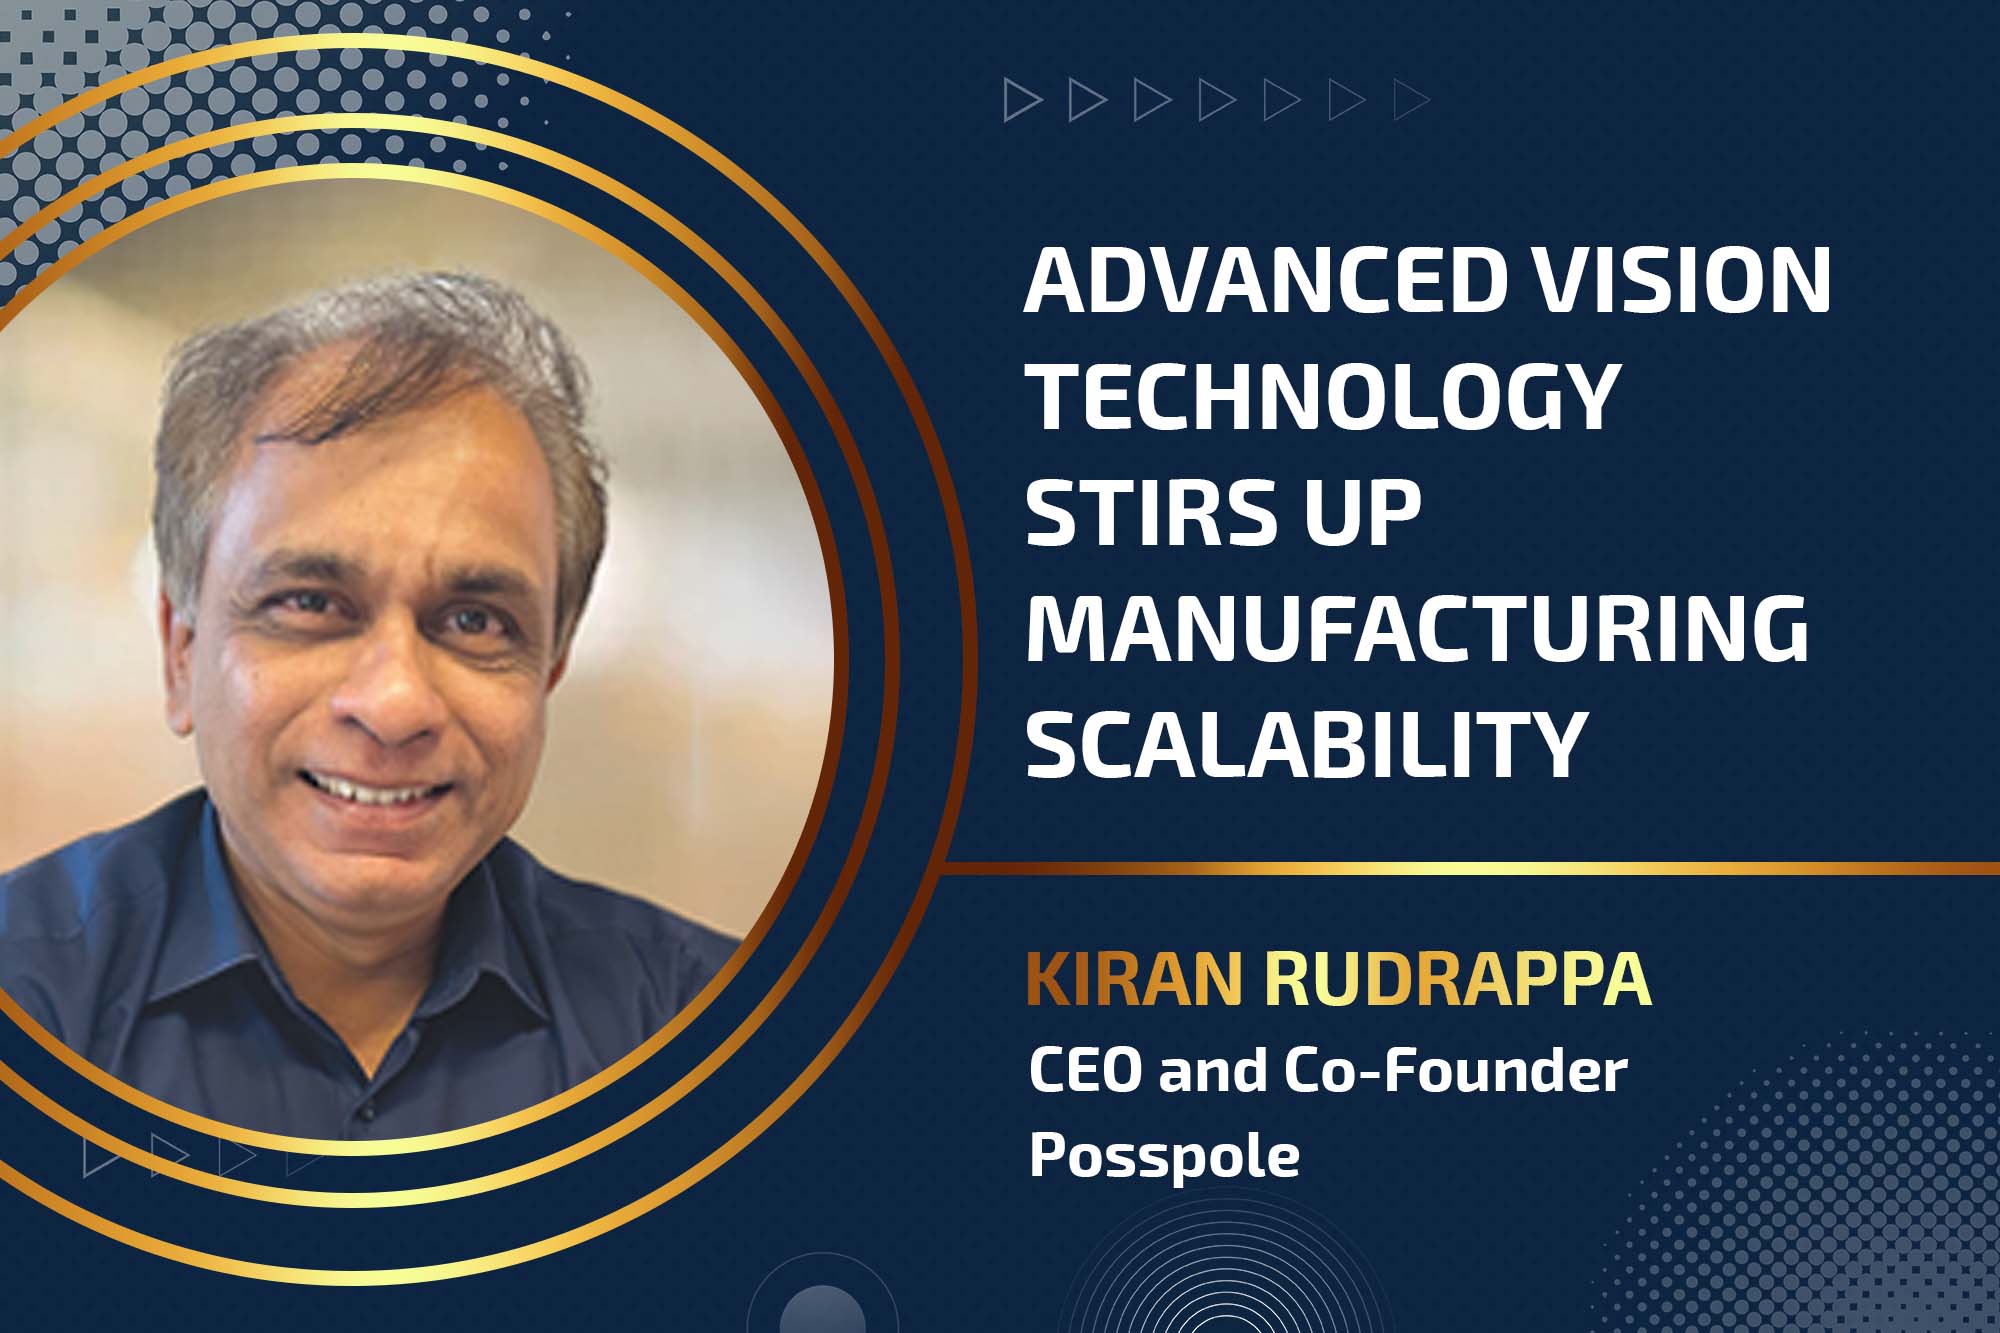 Advanced vision technology stirs up manufacturing scalability